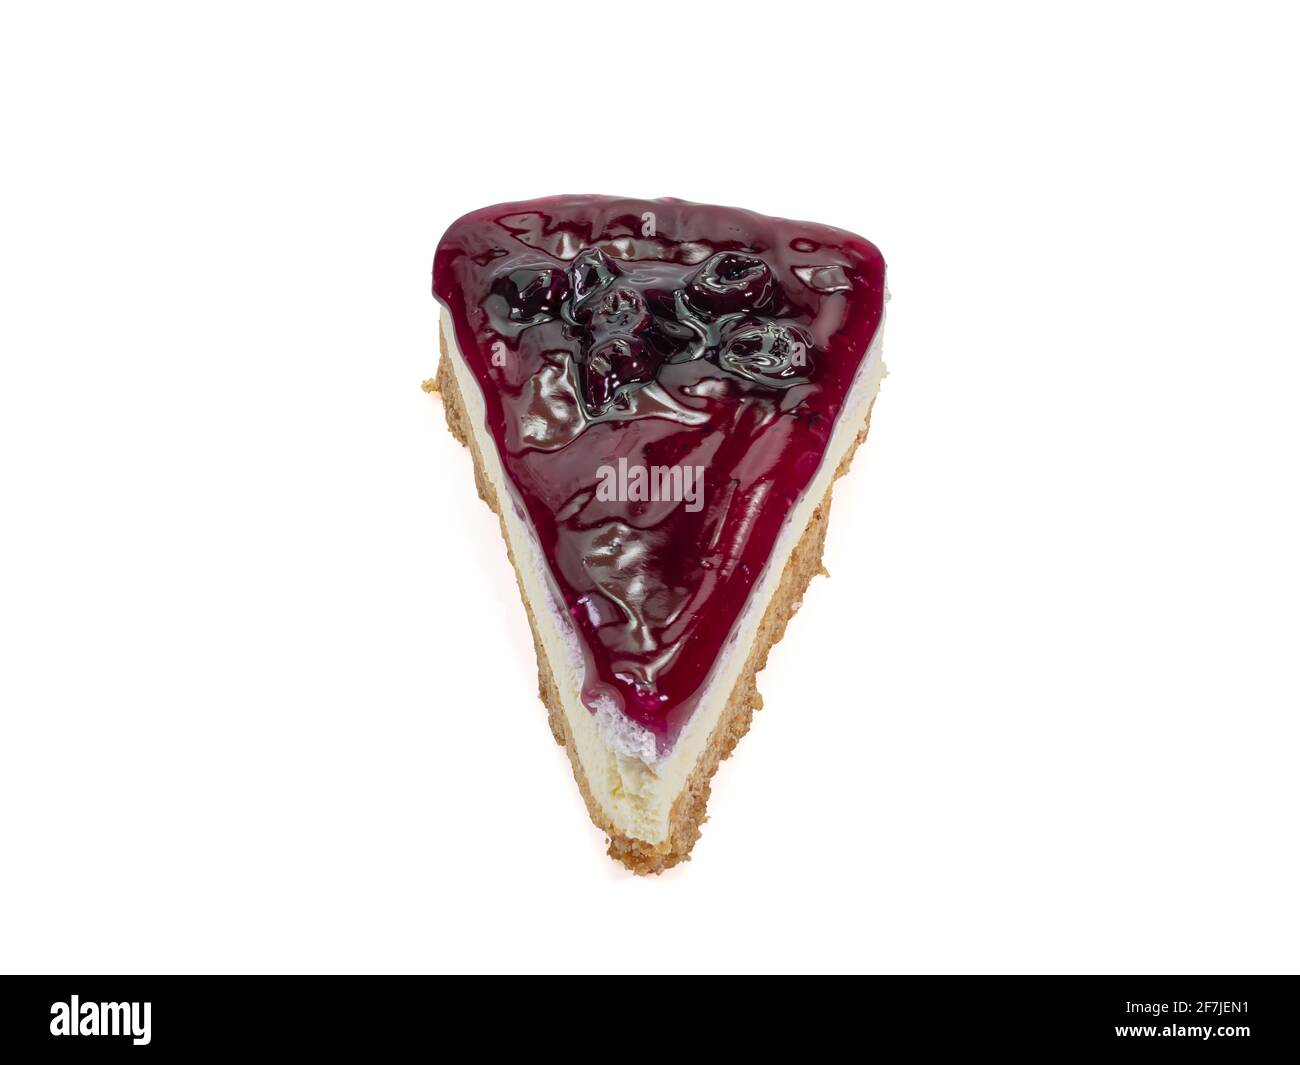 Blueberry cheese pie, a close up of homemade berries cheesecake bakery dessert isolated on white background. Stock Photo